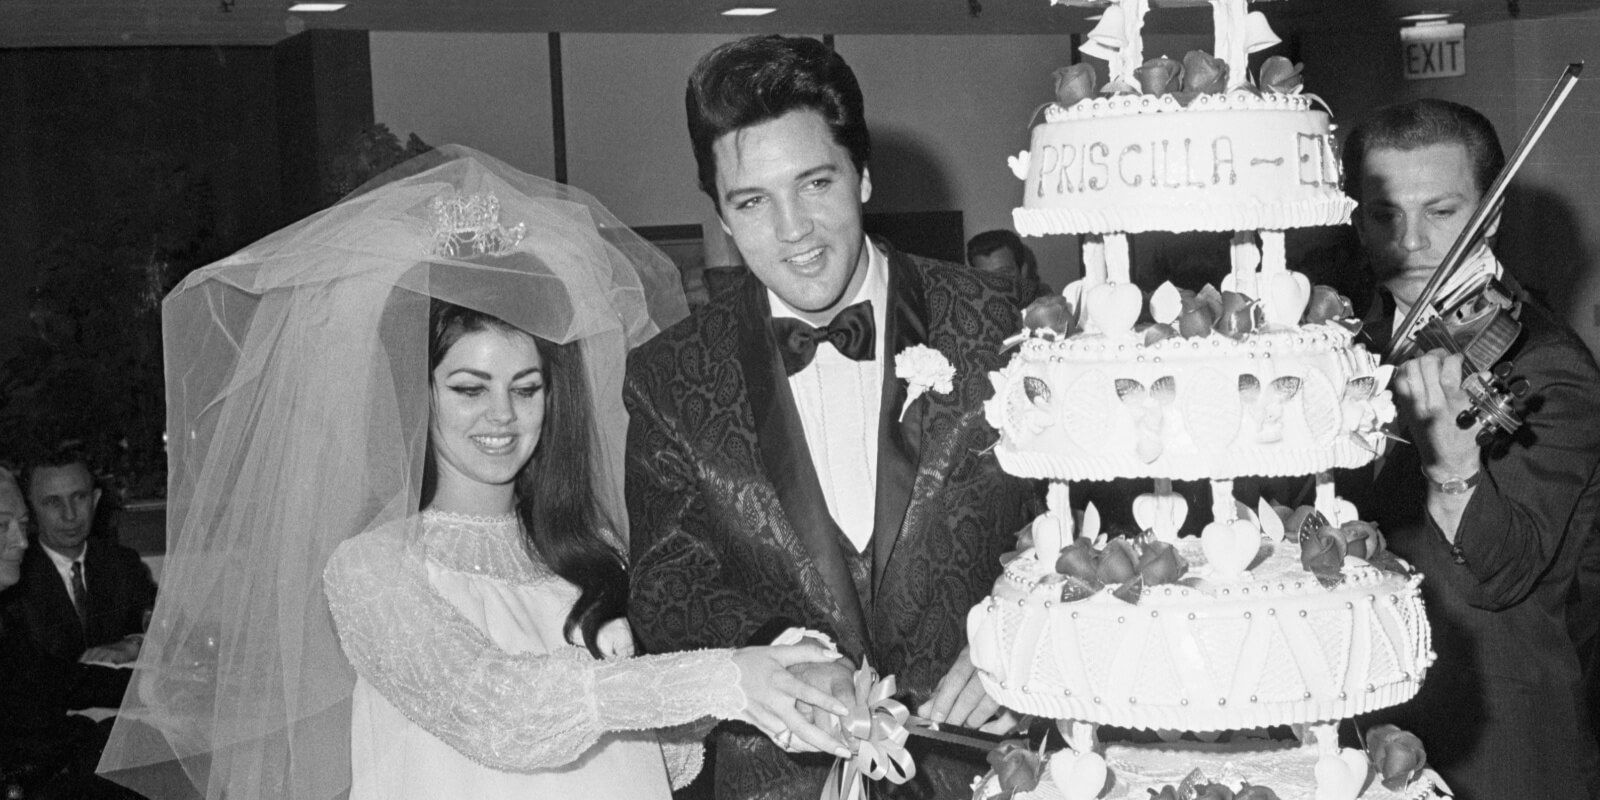 Priscilla Presley and Elvis Presley on their wedding day in May 1967.